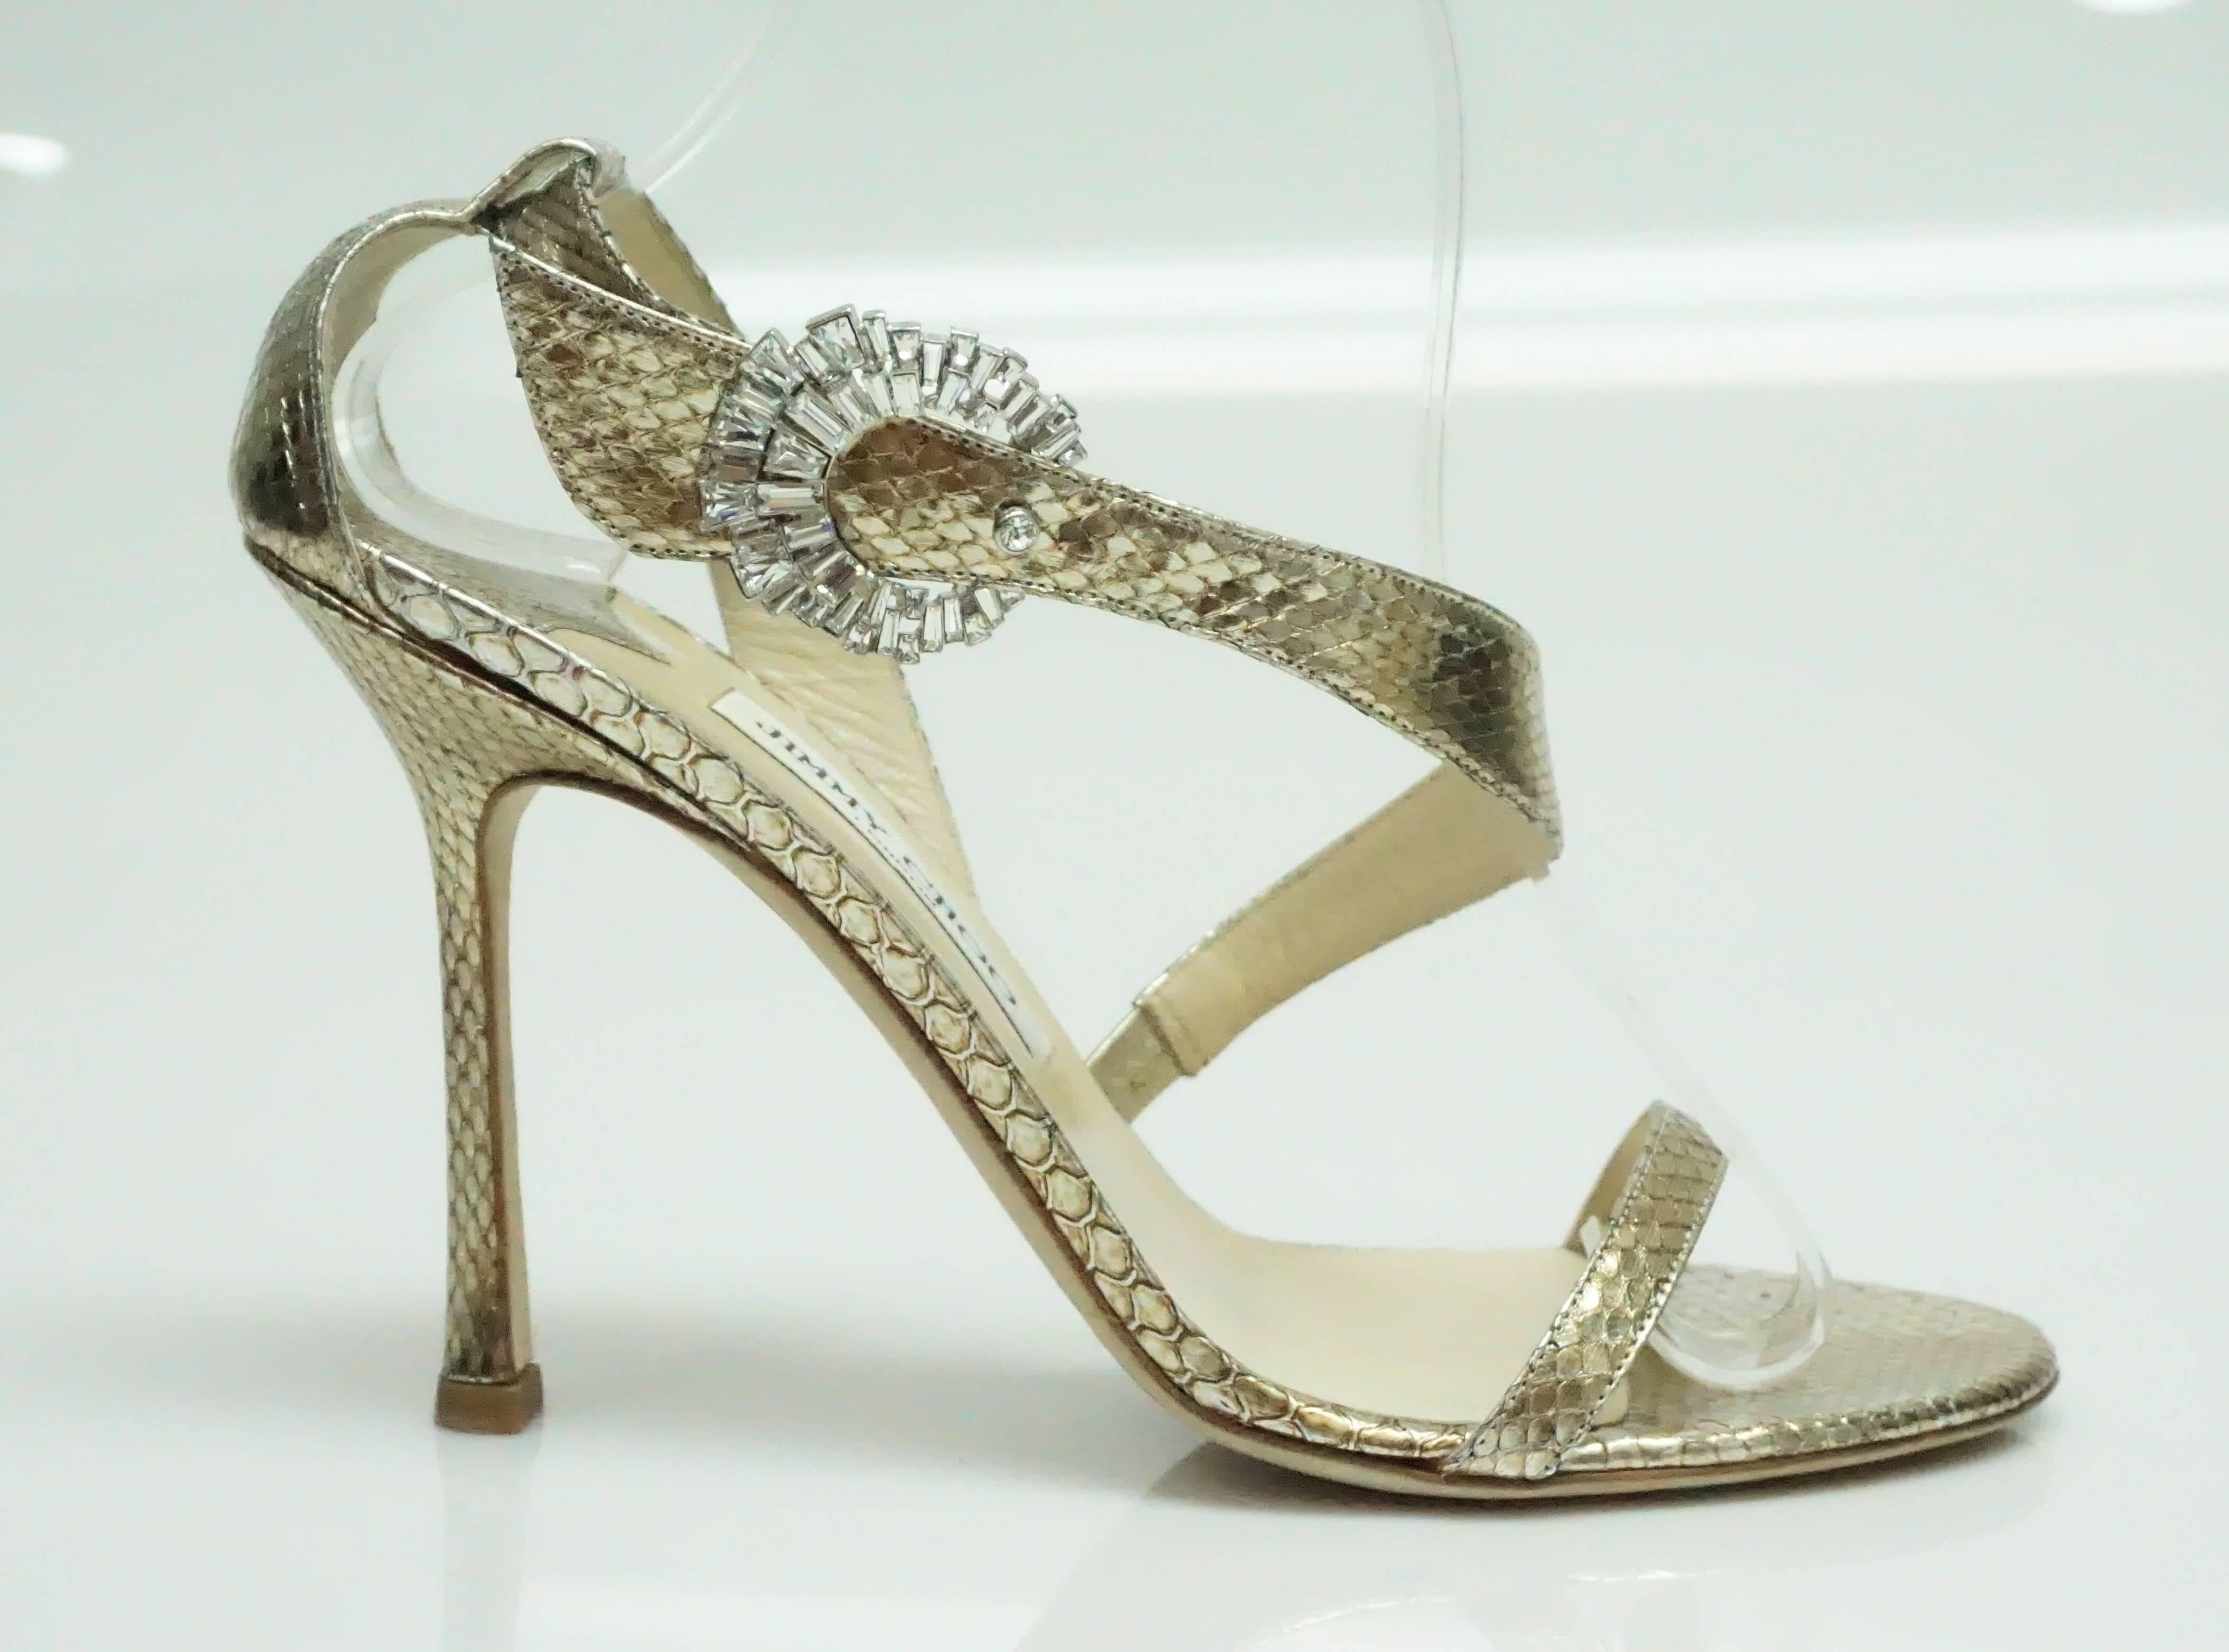 Jimmy Choo Gold Watersnake Sandal w/ Swarovski Buckle - 39 - NEW?NEVER WORN These stunning heels have never been worn before. They have a beautiful wrap around strap that is embellished with a swarovski buckle that is in a circle shape.